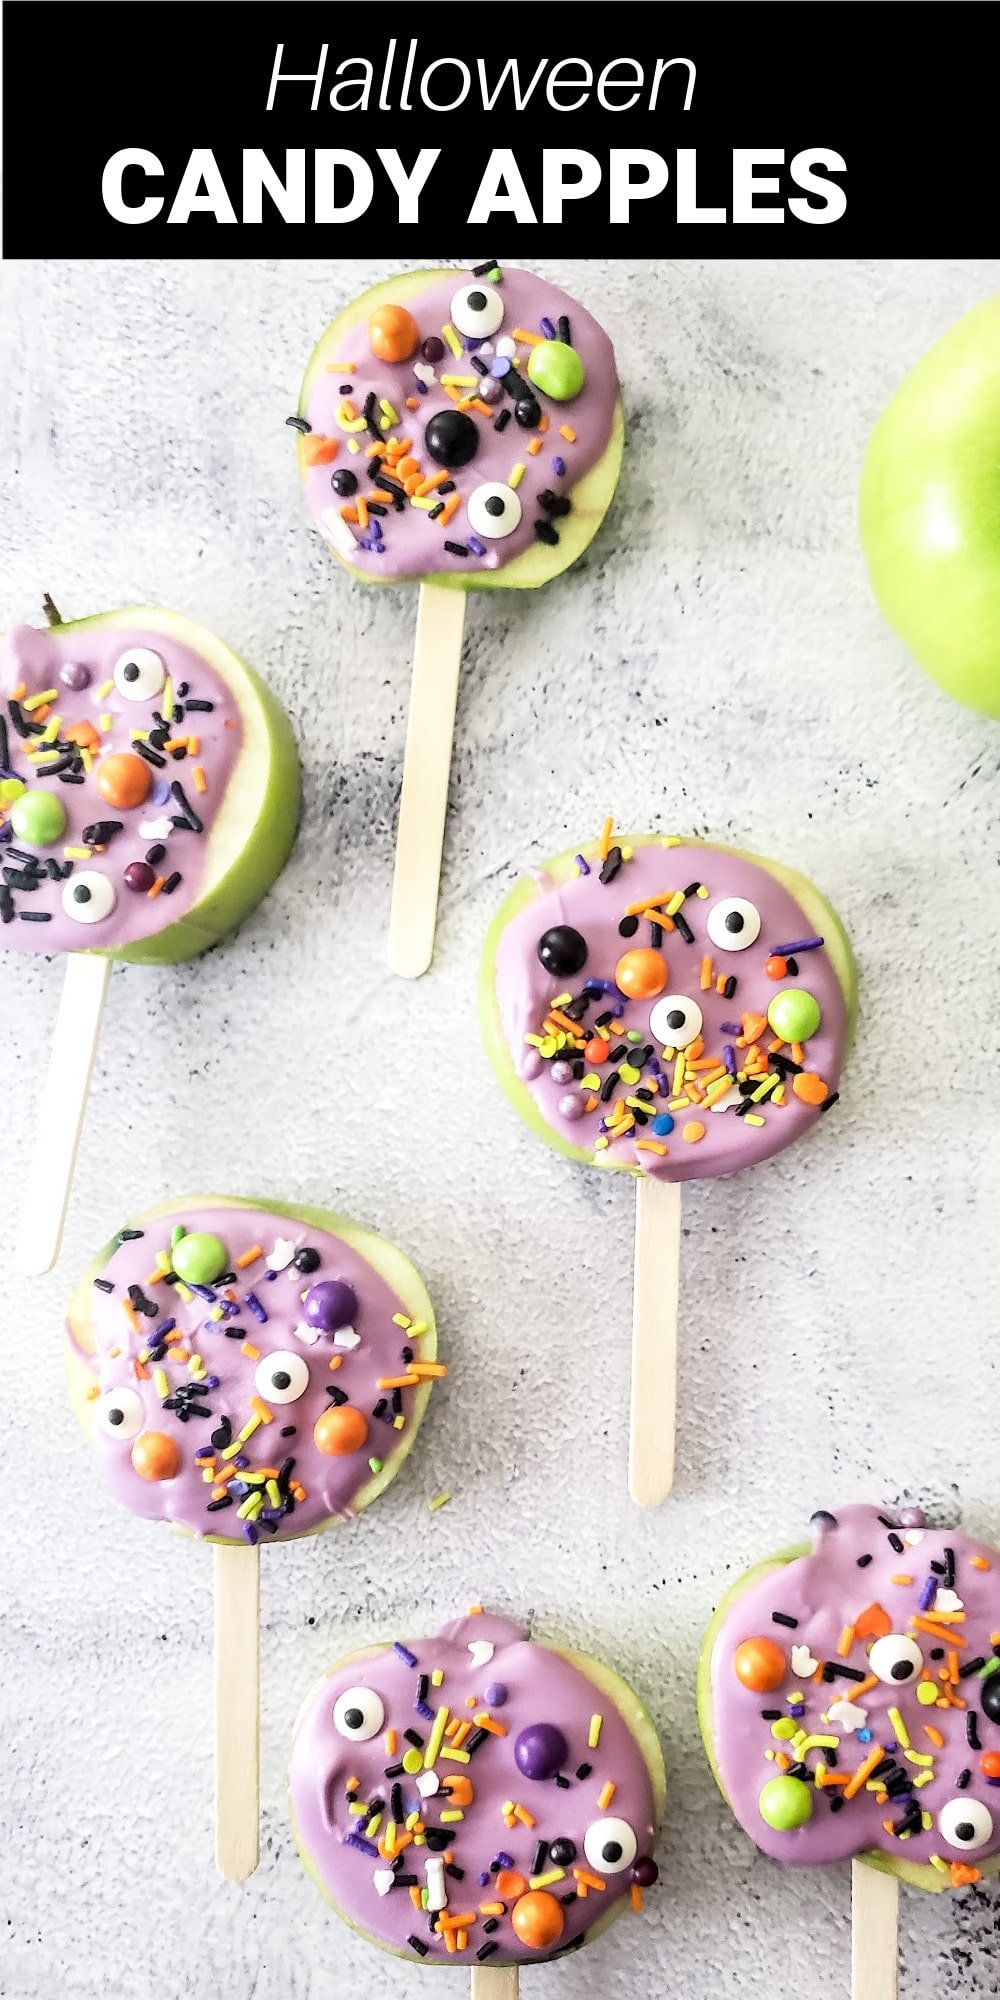 These Halloween candied apples are a fun and spooky twist on a classic fall treat. With their creamy candy coating, bright purple shade, and festive decorations, they’re a cute and delicious addition to your Halloween party table.